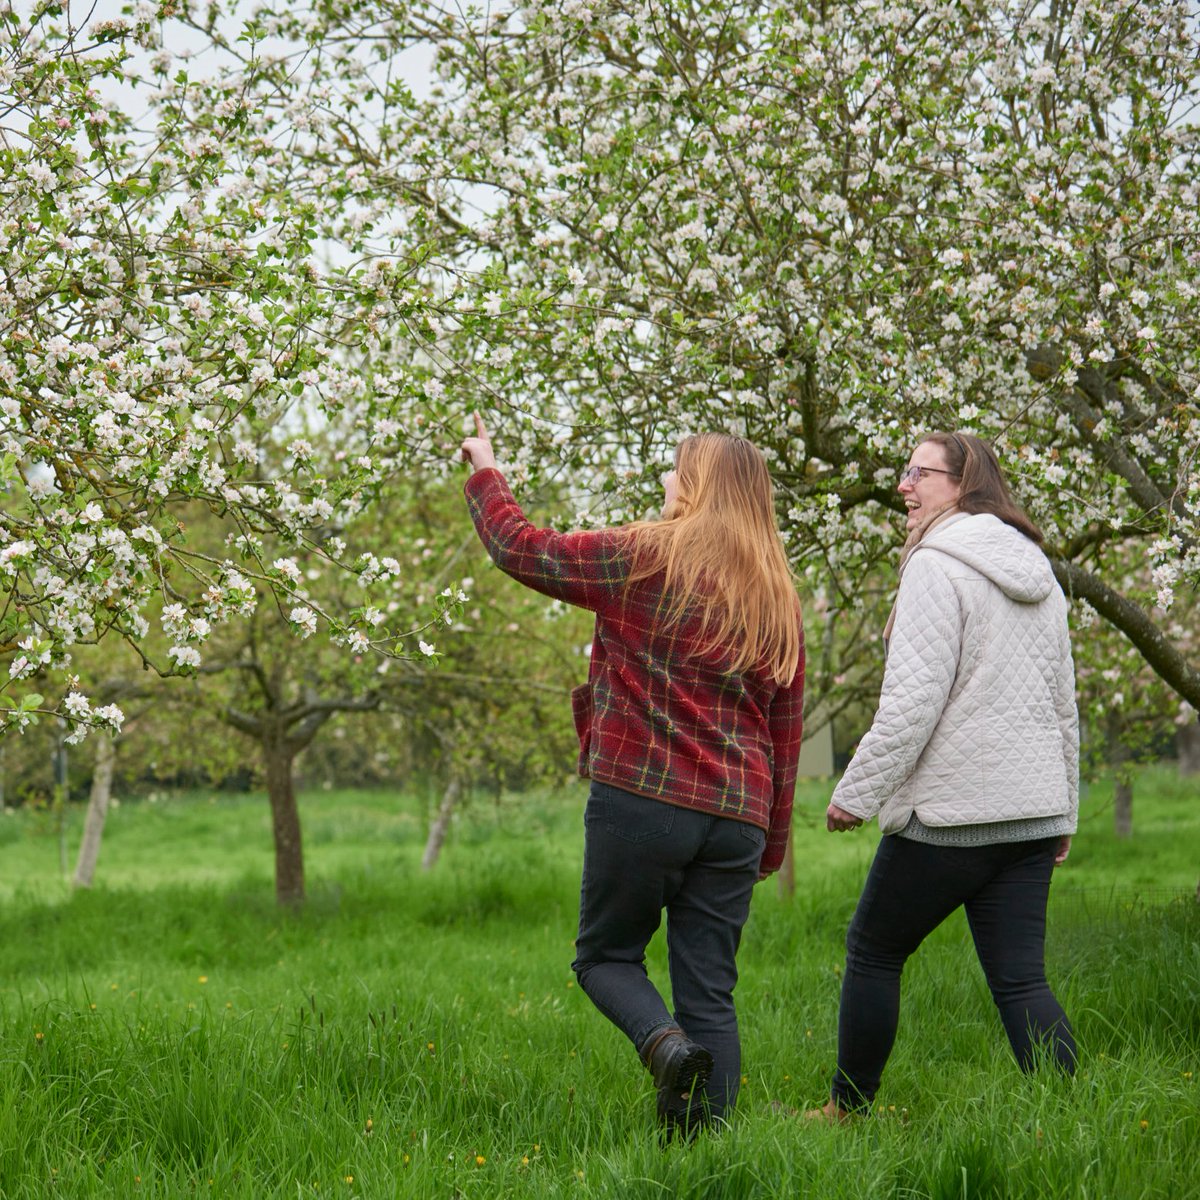 Join a #free #WalkAndTalk around the #orchard at Parke, with its array of old Devonian apple varieties. Led by a local expert from Orchard Link.

Sat 27 Apr, 10.30am-12.30pm
Free event, email parkeevents@nationaltust.org.uk to book
📷 © NTI/Trevor Ray Hart